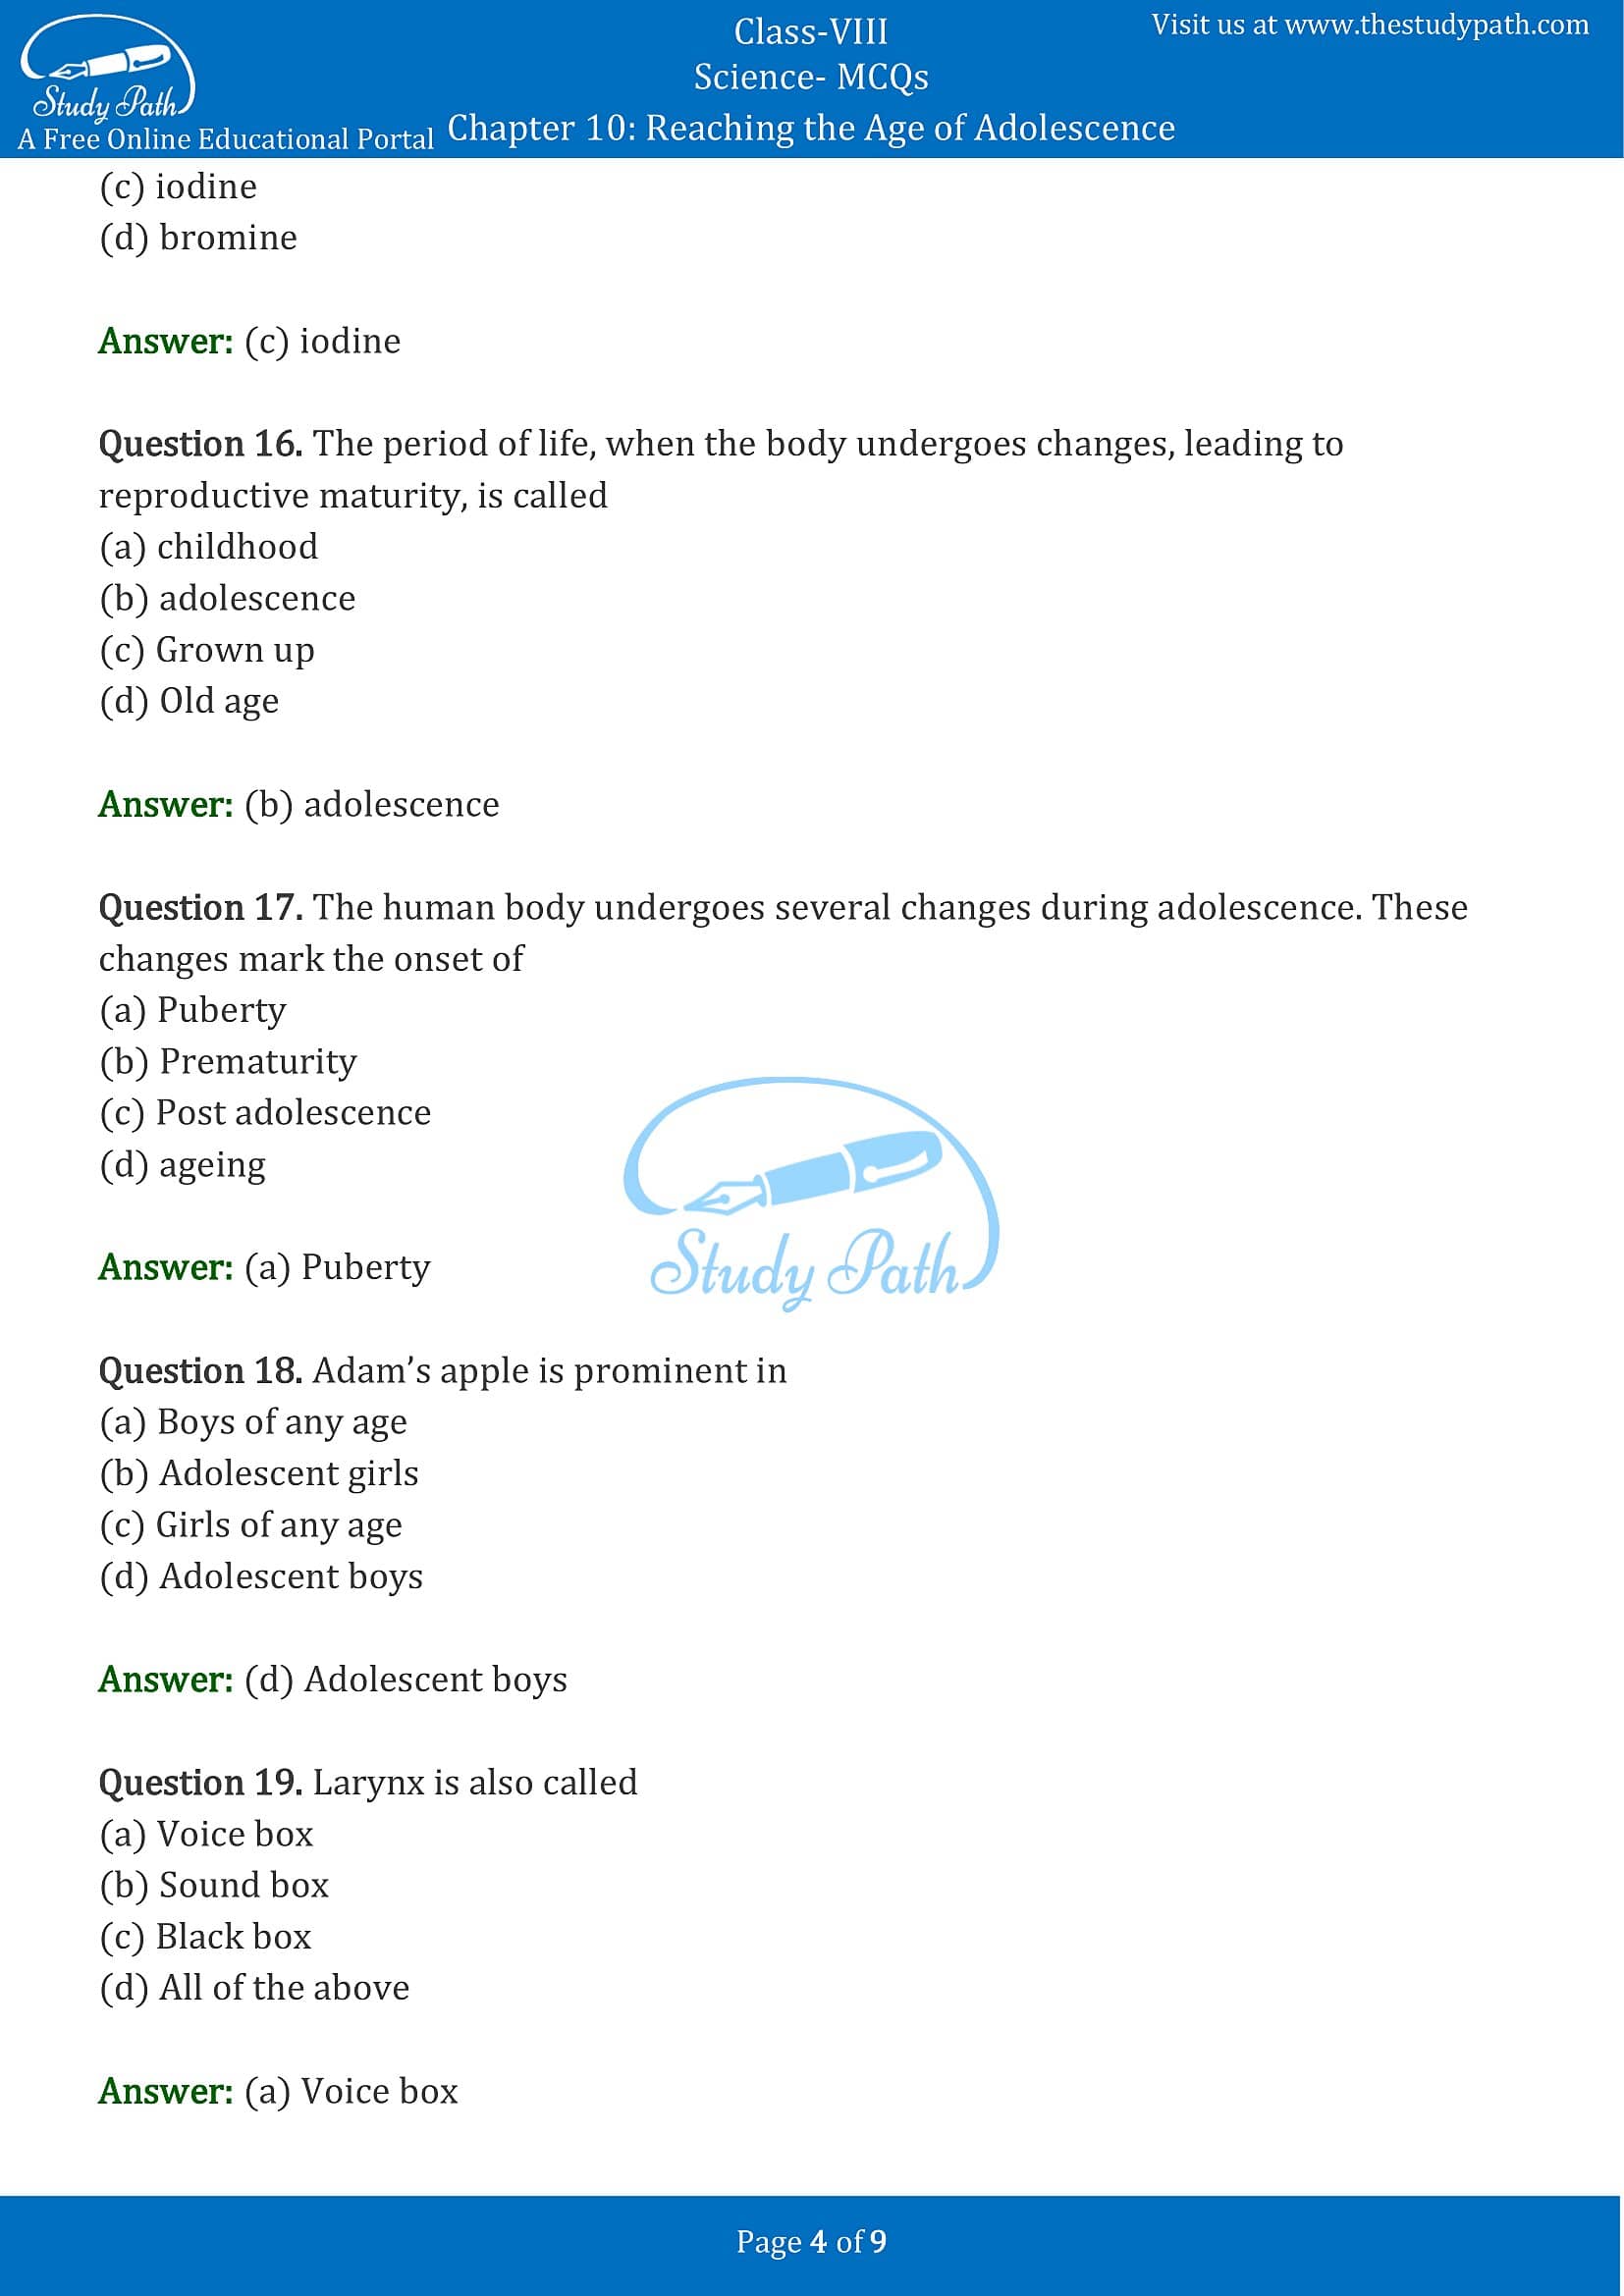 MCQ Questions for Class 8 Science Chapter 10 Reaching the Age of Adolescence with Answers PDF -4